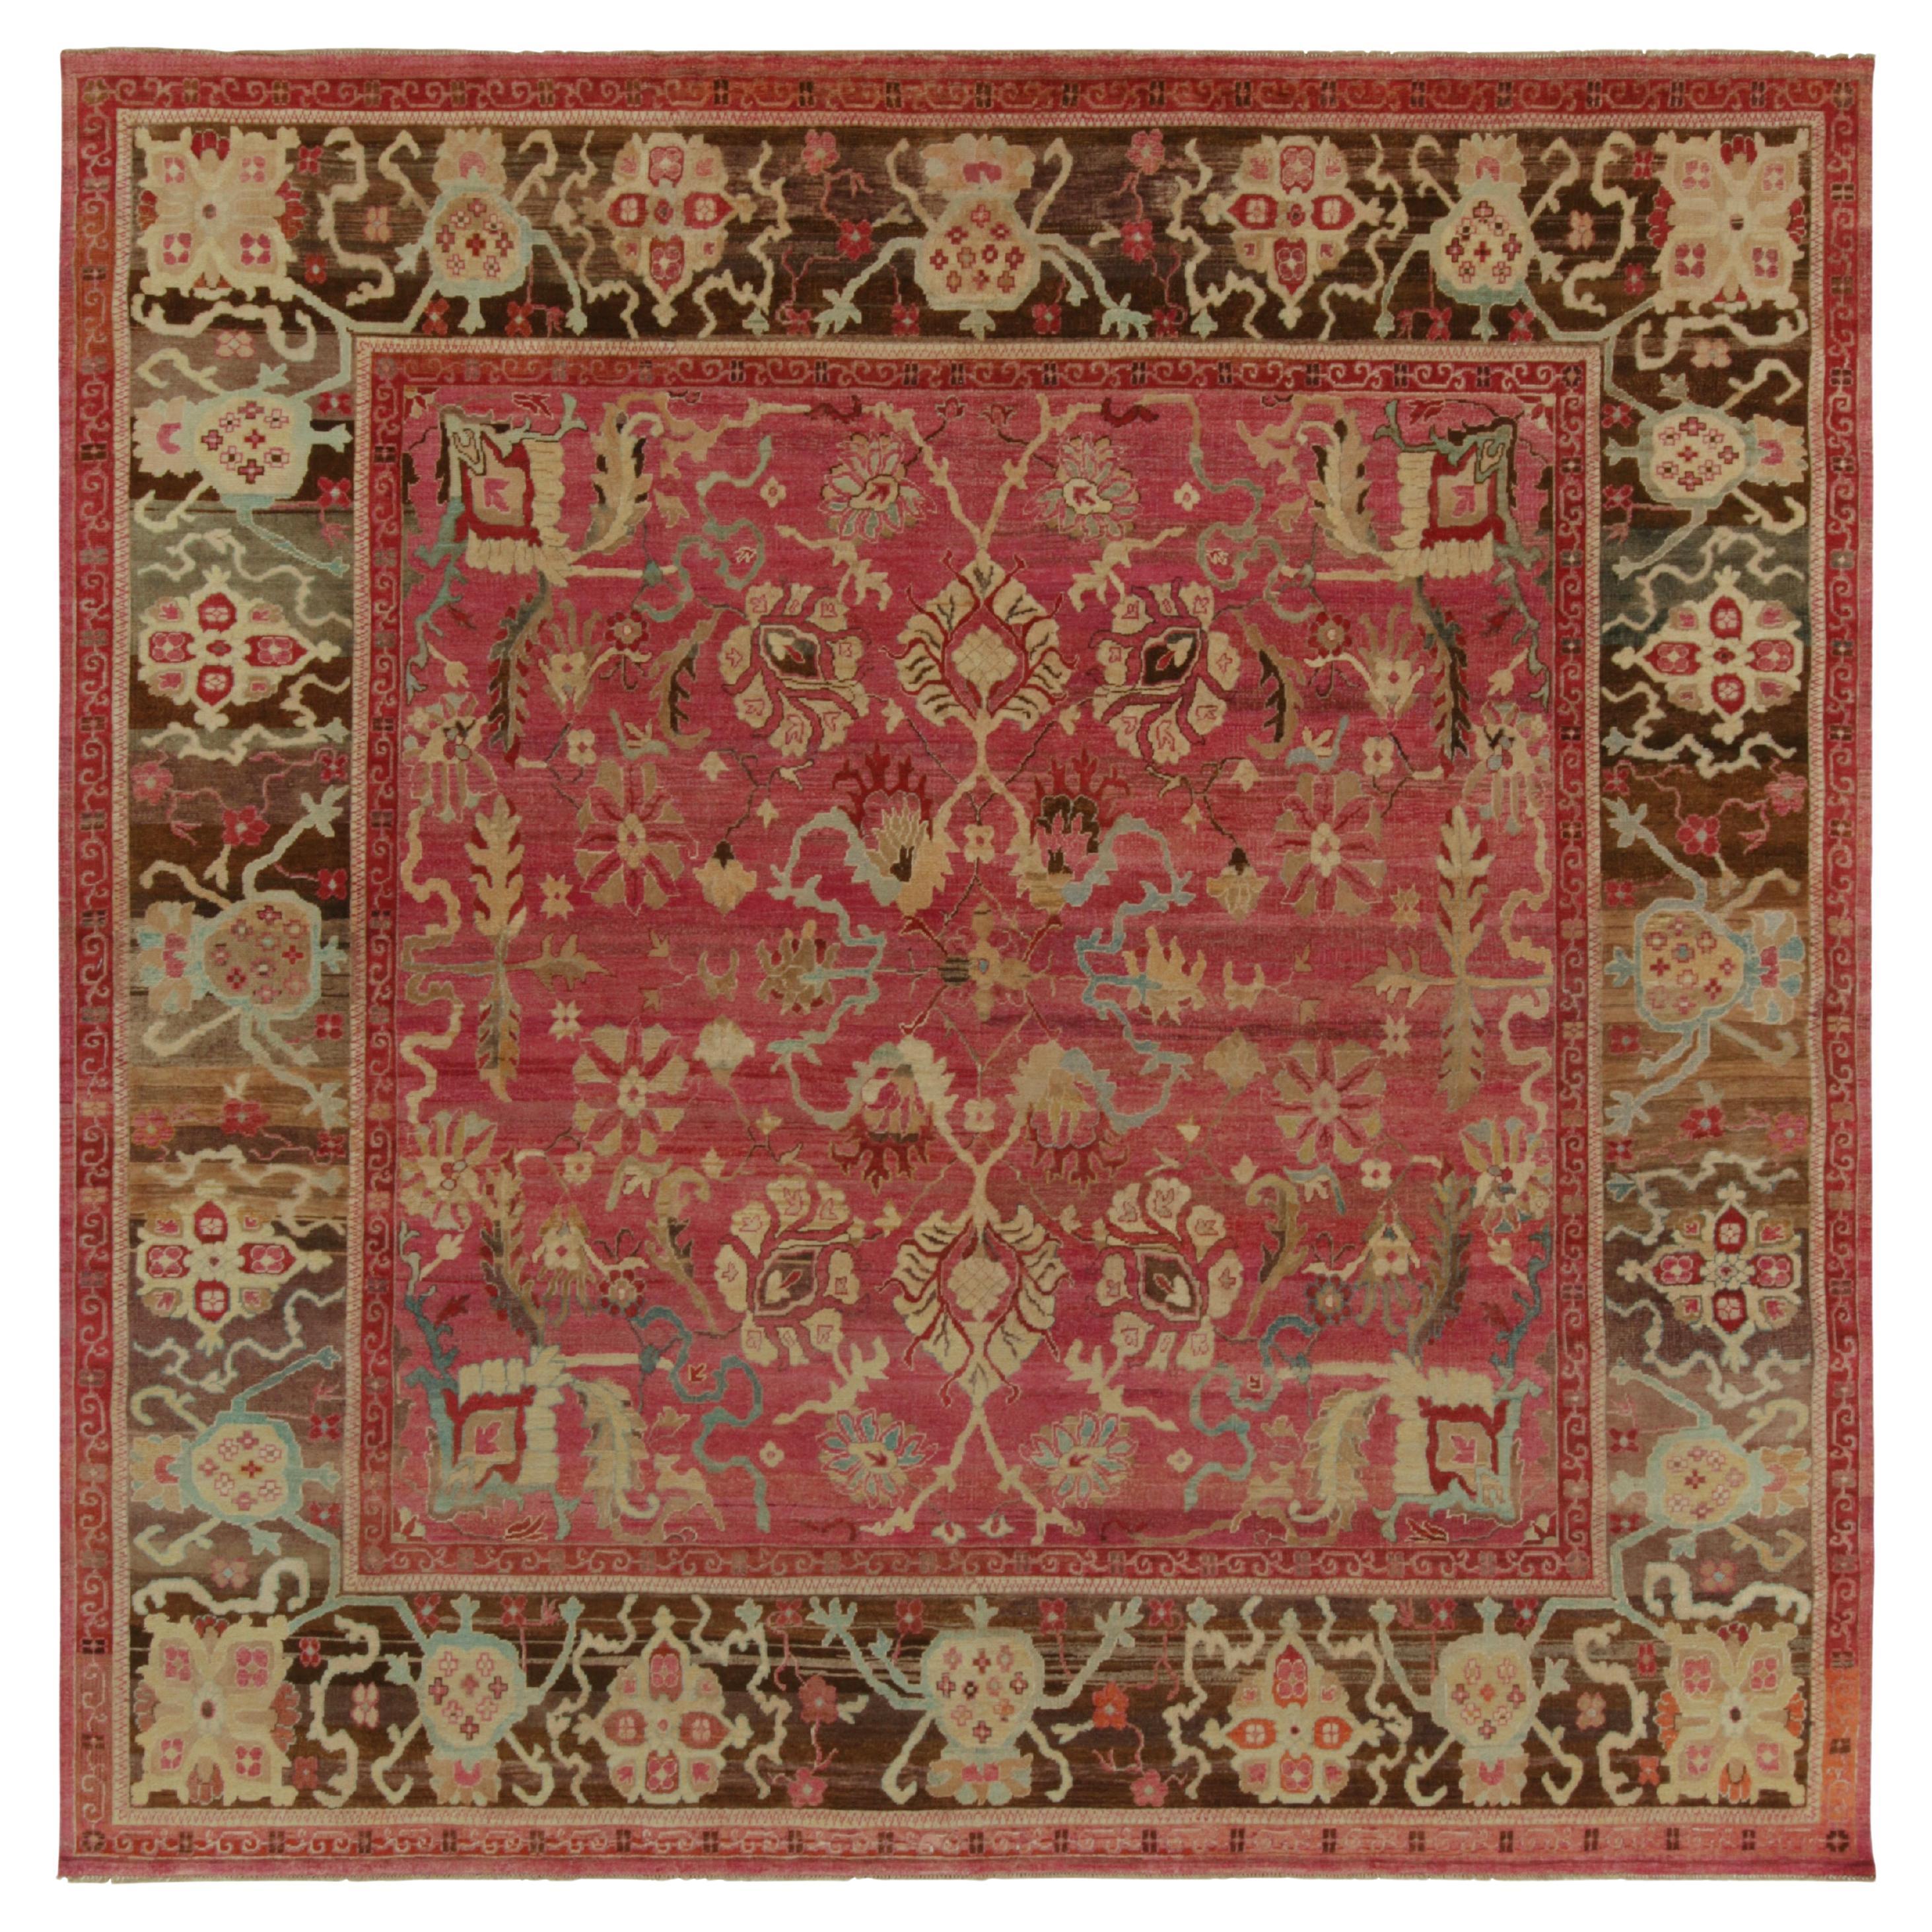 Rug & Kilim’s Classic Style Square Rug in Pink, Red and Beige-Brown Florals